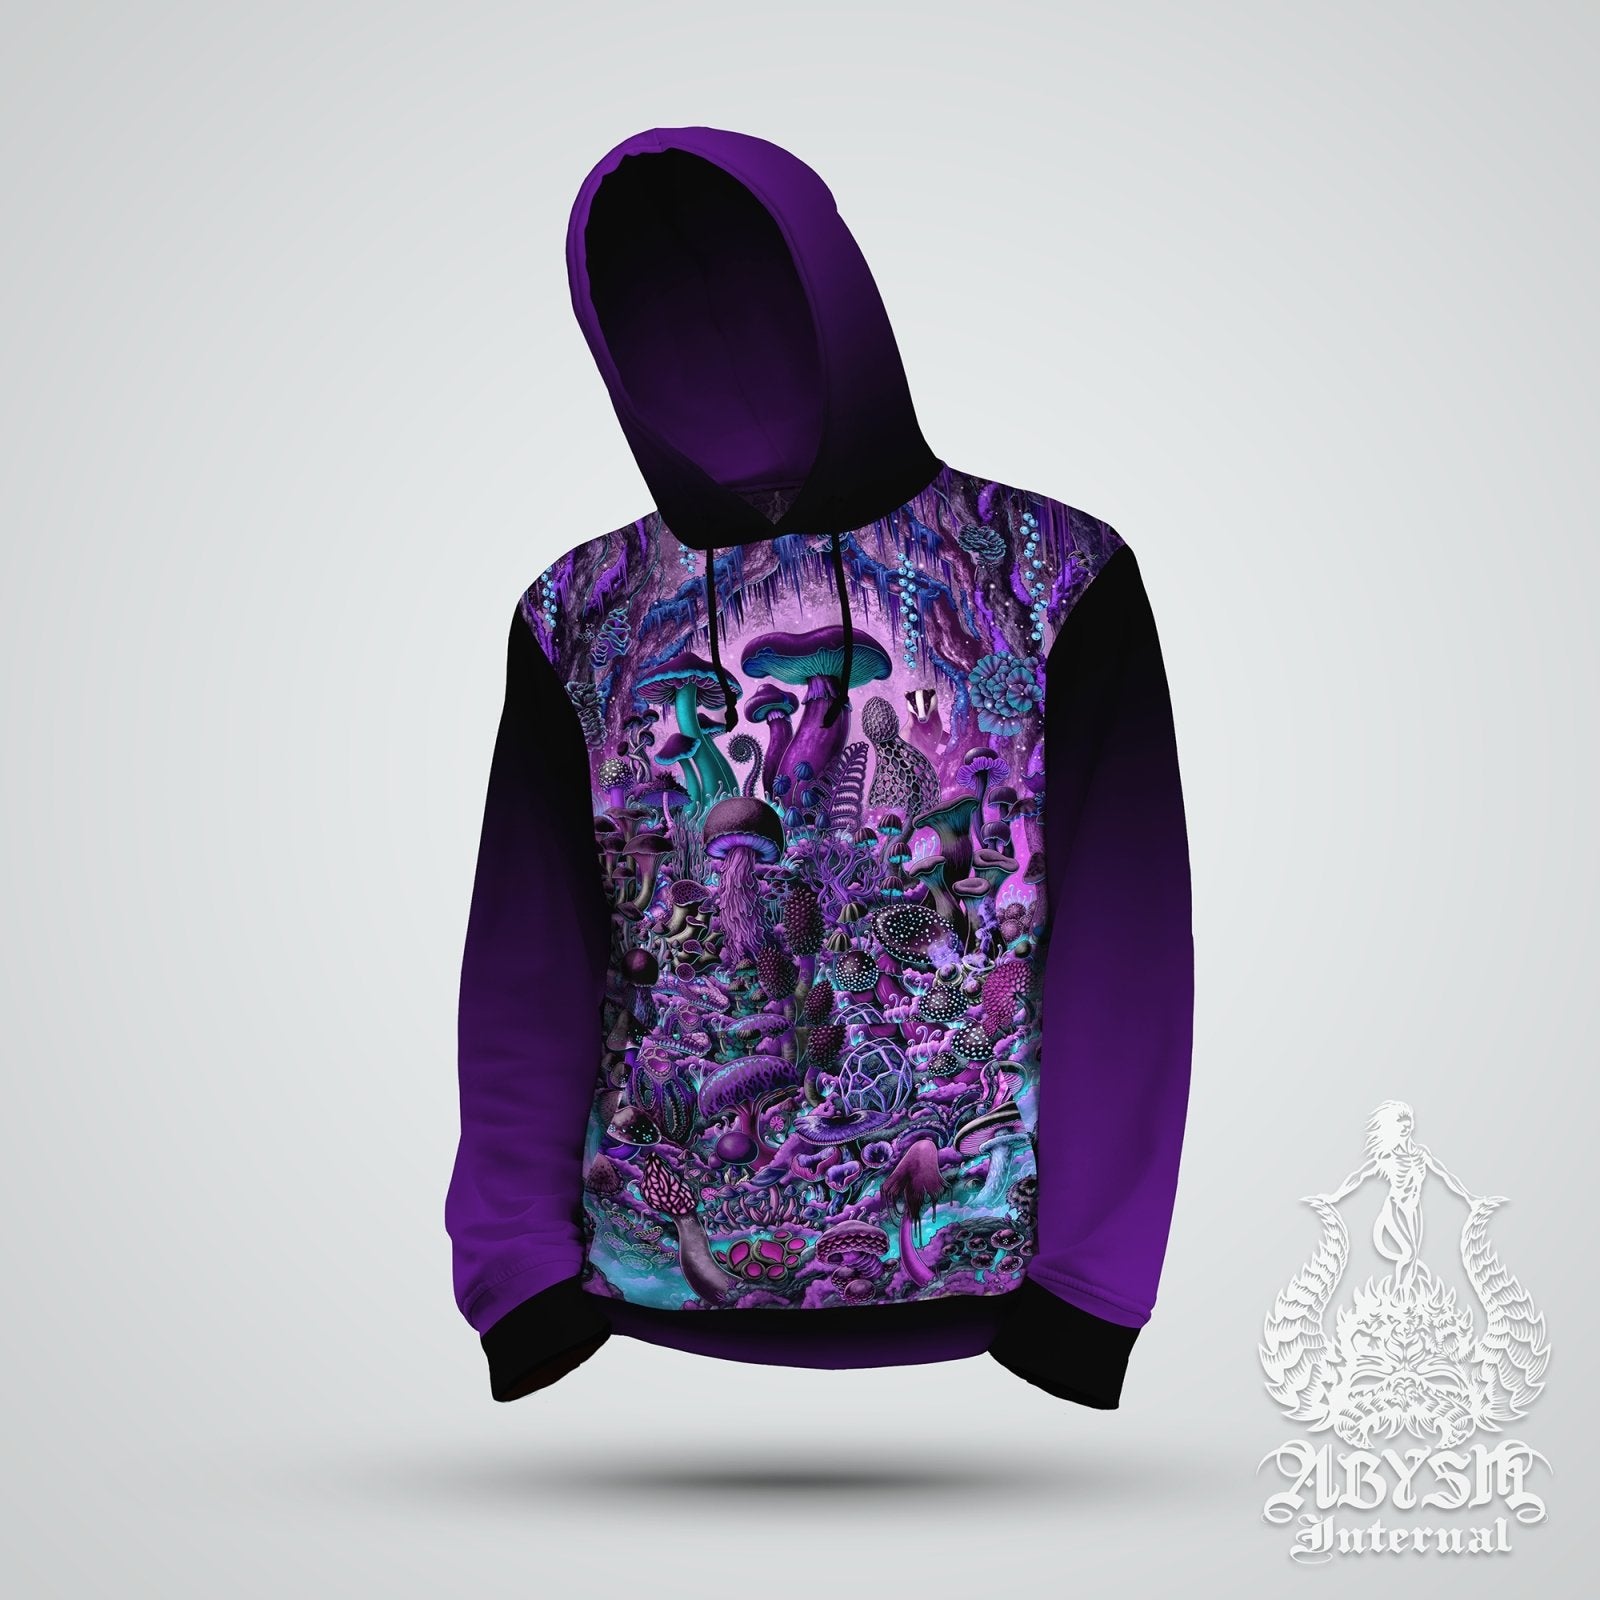 Gothic Mushrooms Hoodie, Pastel Goth Festival Streetwear, Witchy Outfit, Magic Shrooms, Alternative Clothing, Unisex - Black and purple - Abysm Internal